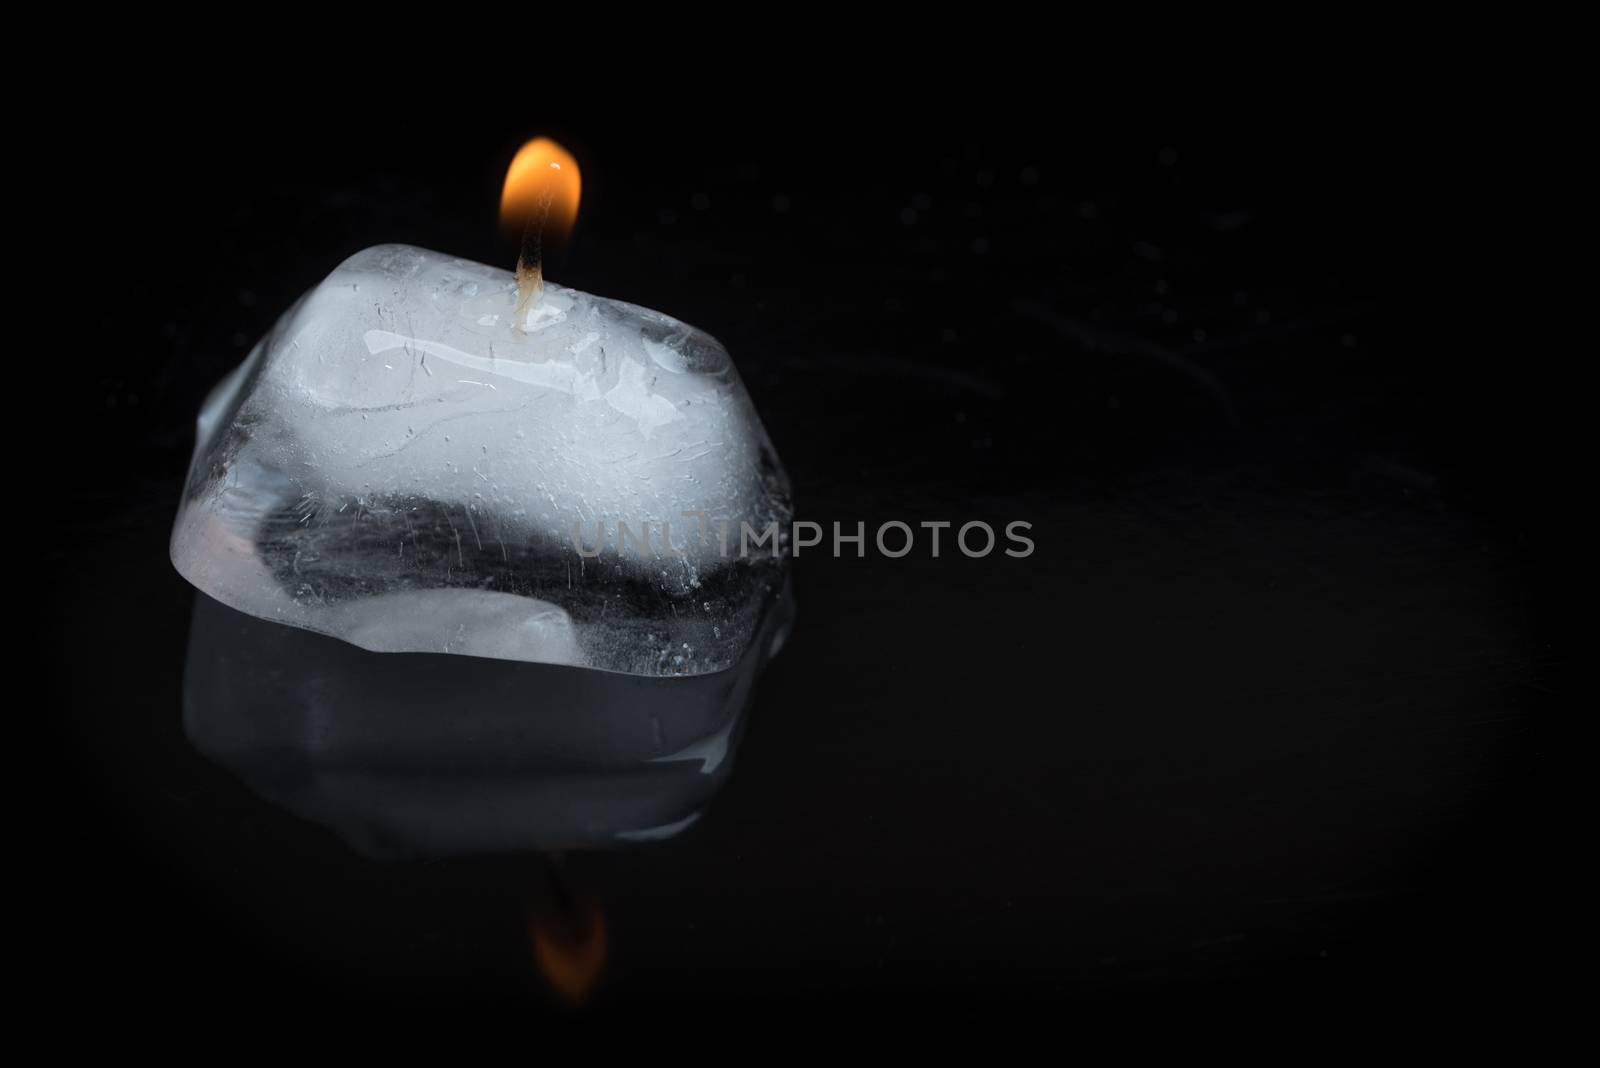 A close up shot of a lit candle wick stuck into an ice cube on a black background with reflection.